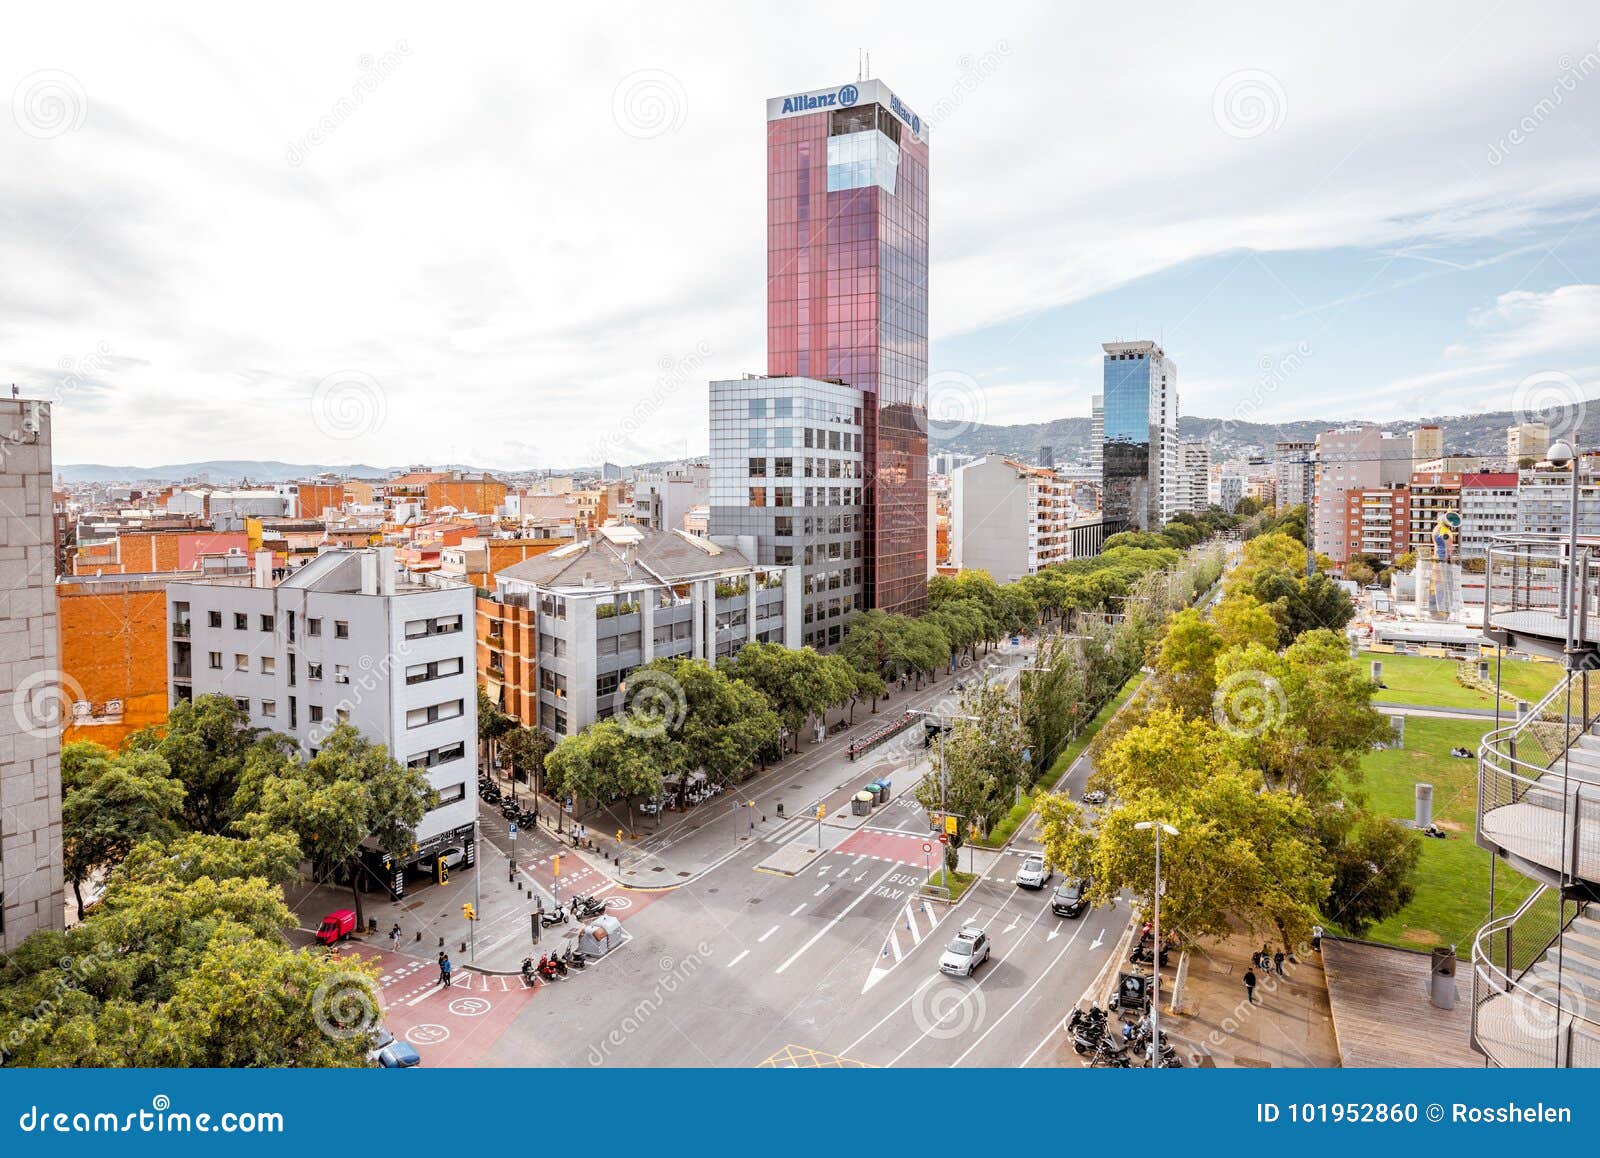 Barcelona city view editorial image. Image of cars, cityscape - 101952860